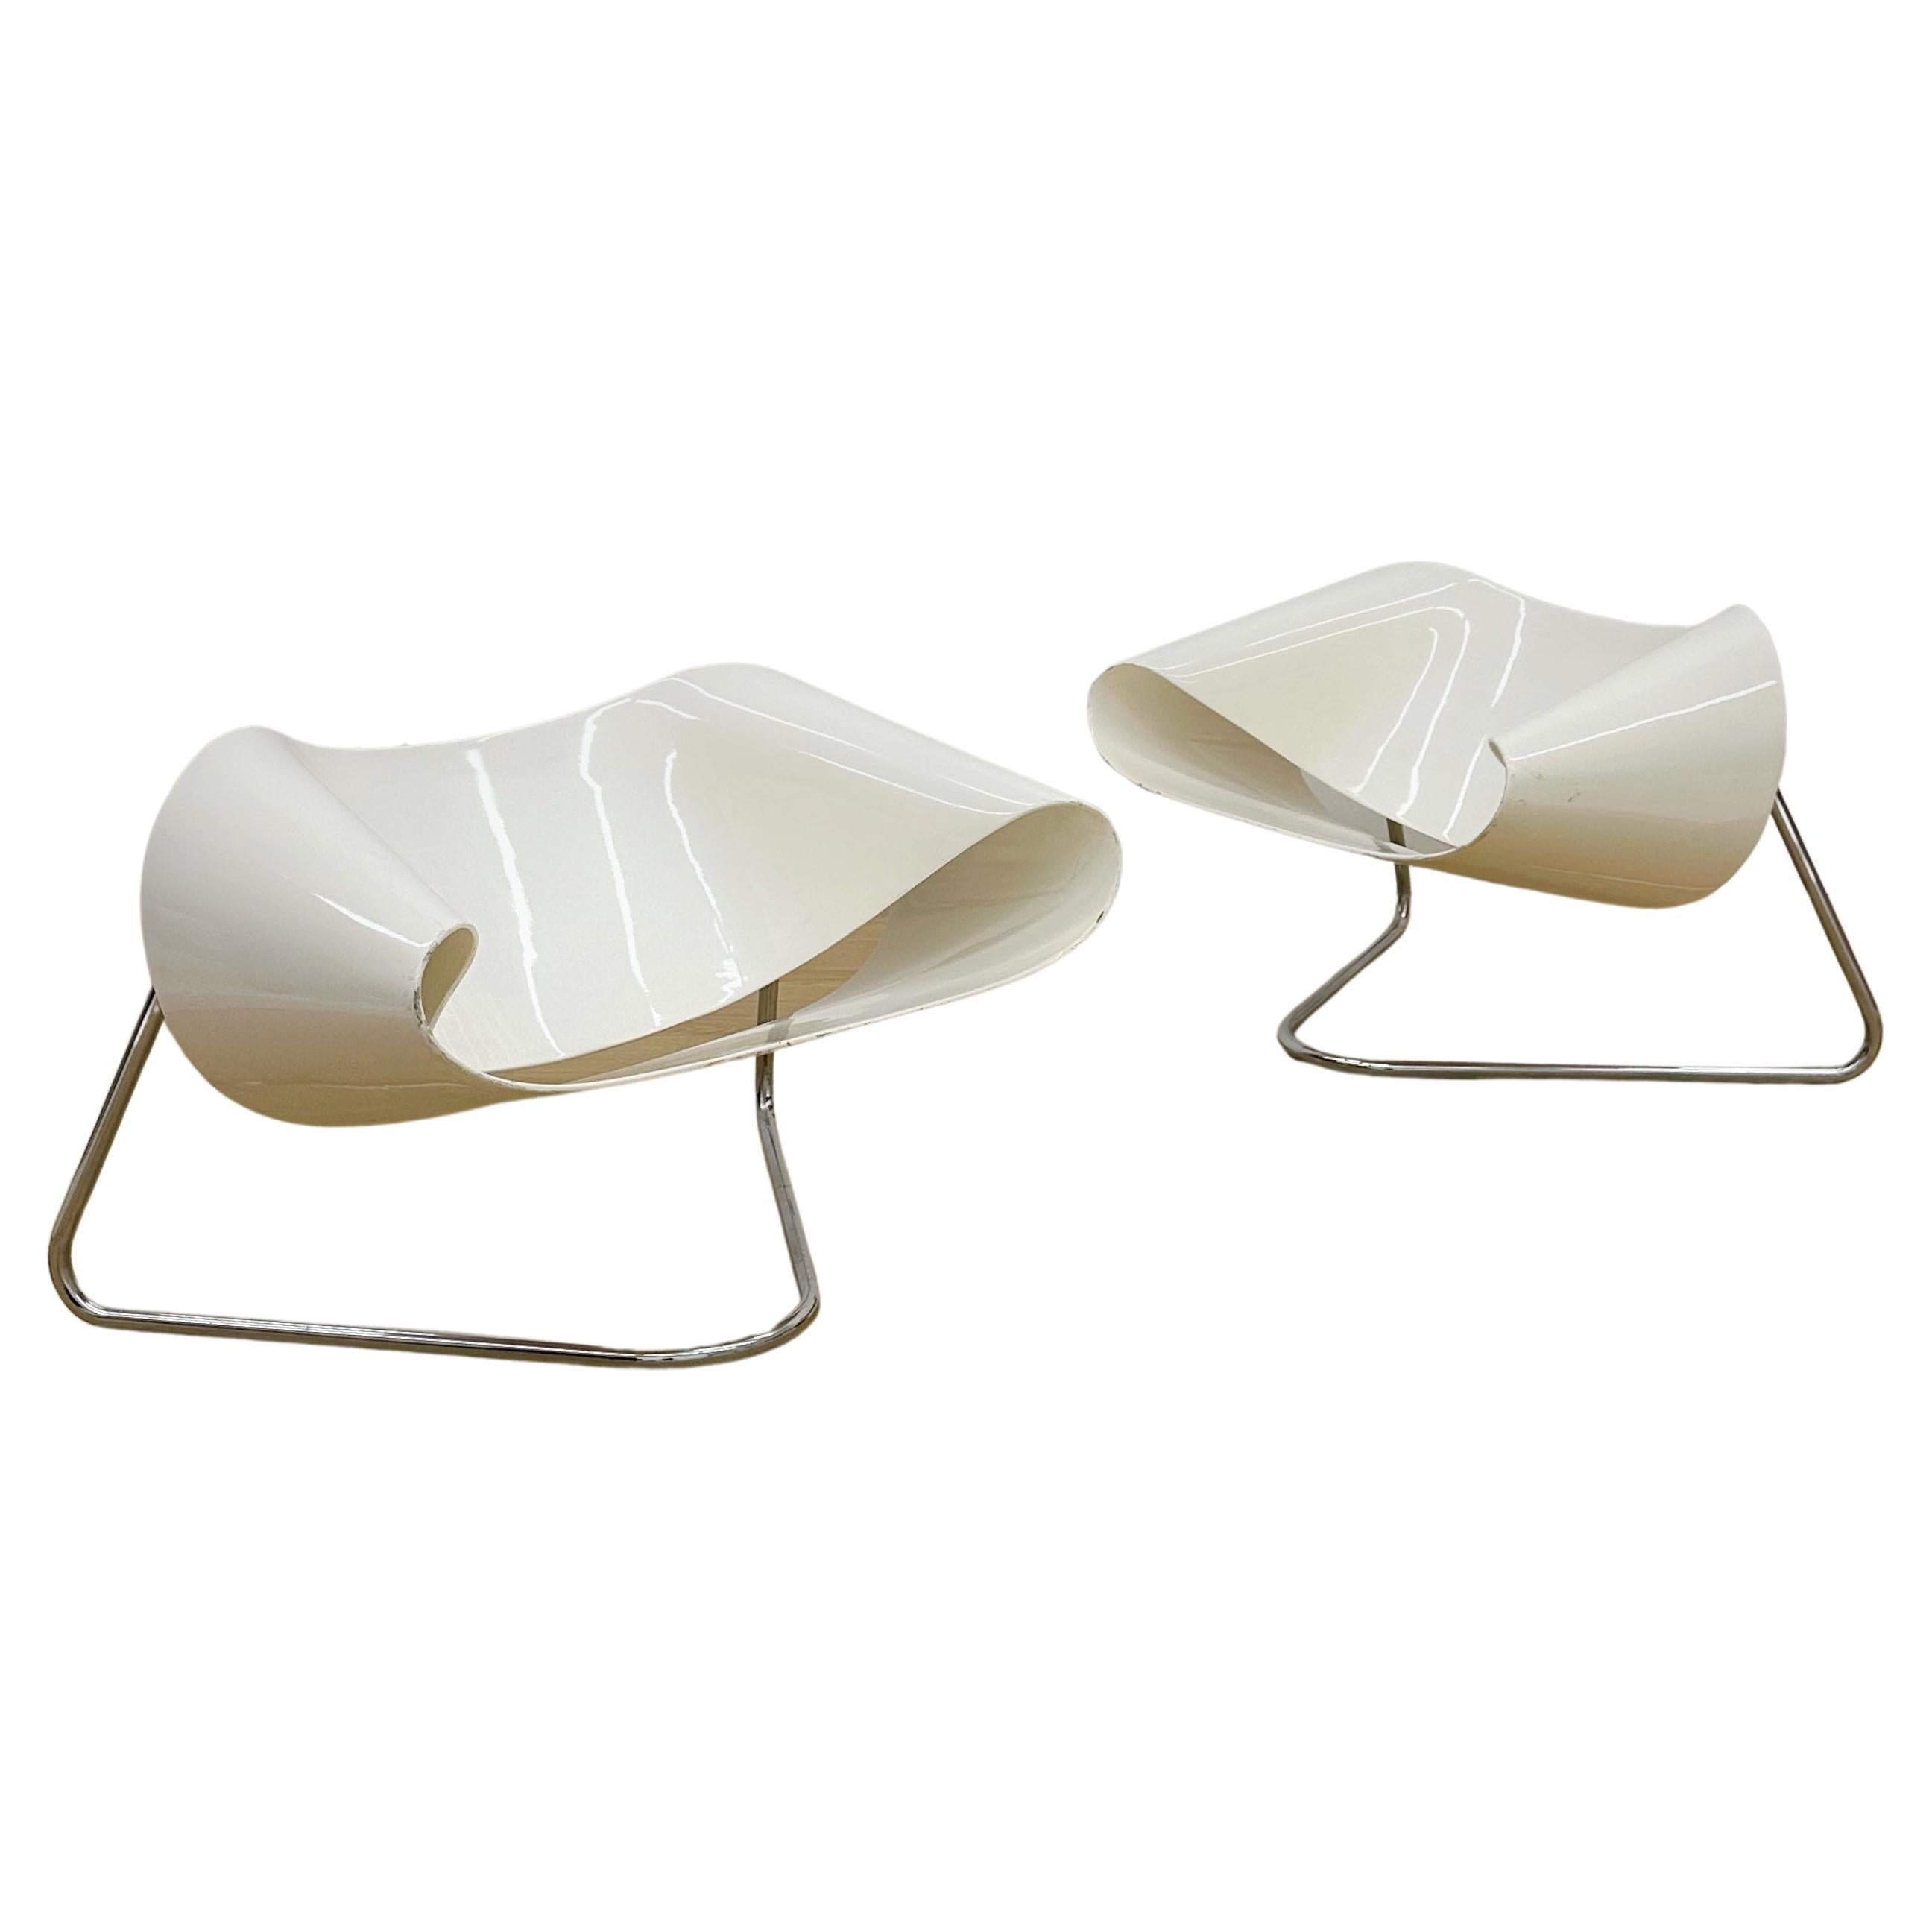 Pair of CL9 Ribbon Chairs by Cesare Leonardi and Franca Stagi for Fiarm For Sale